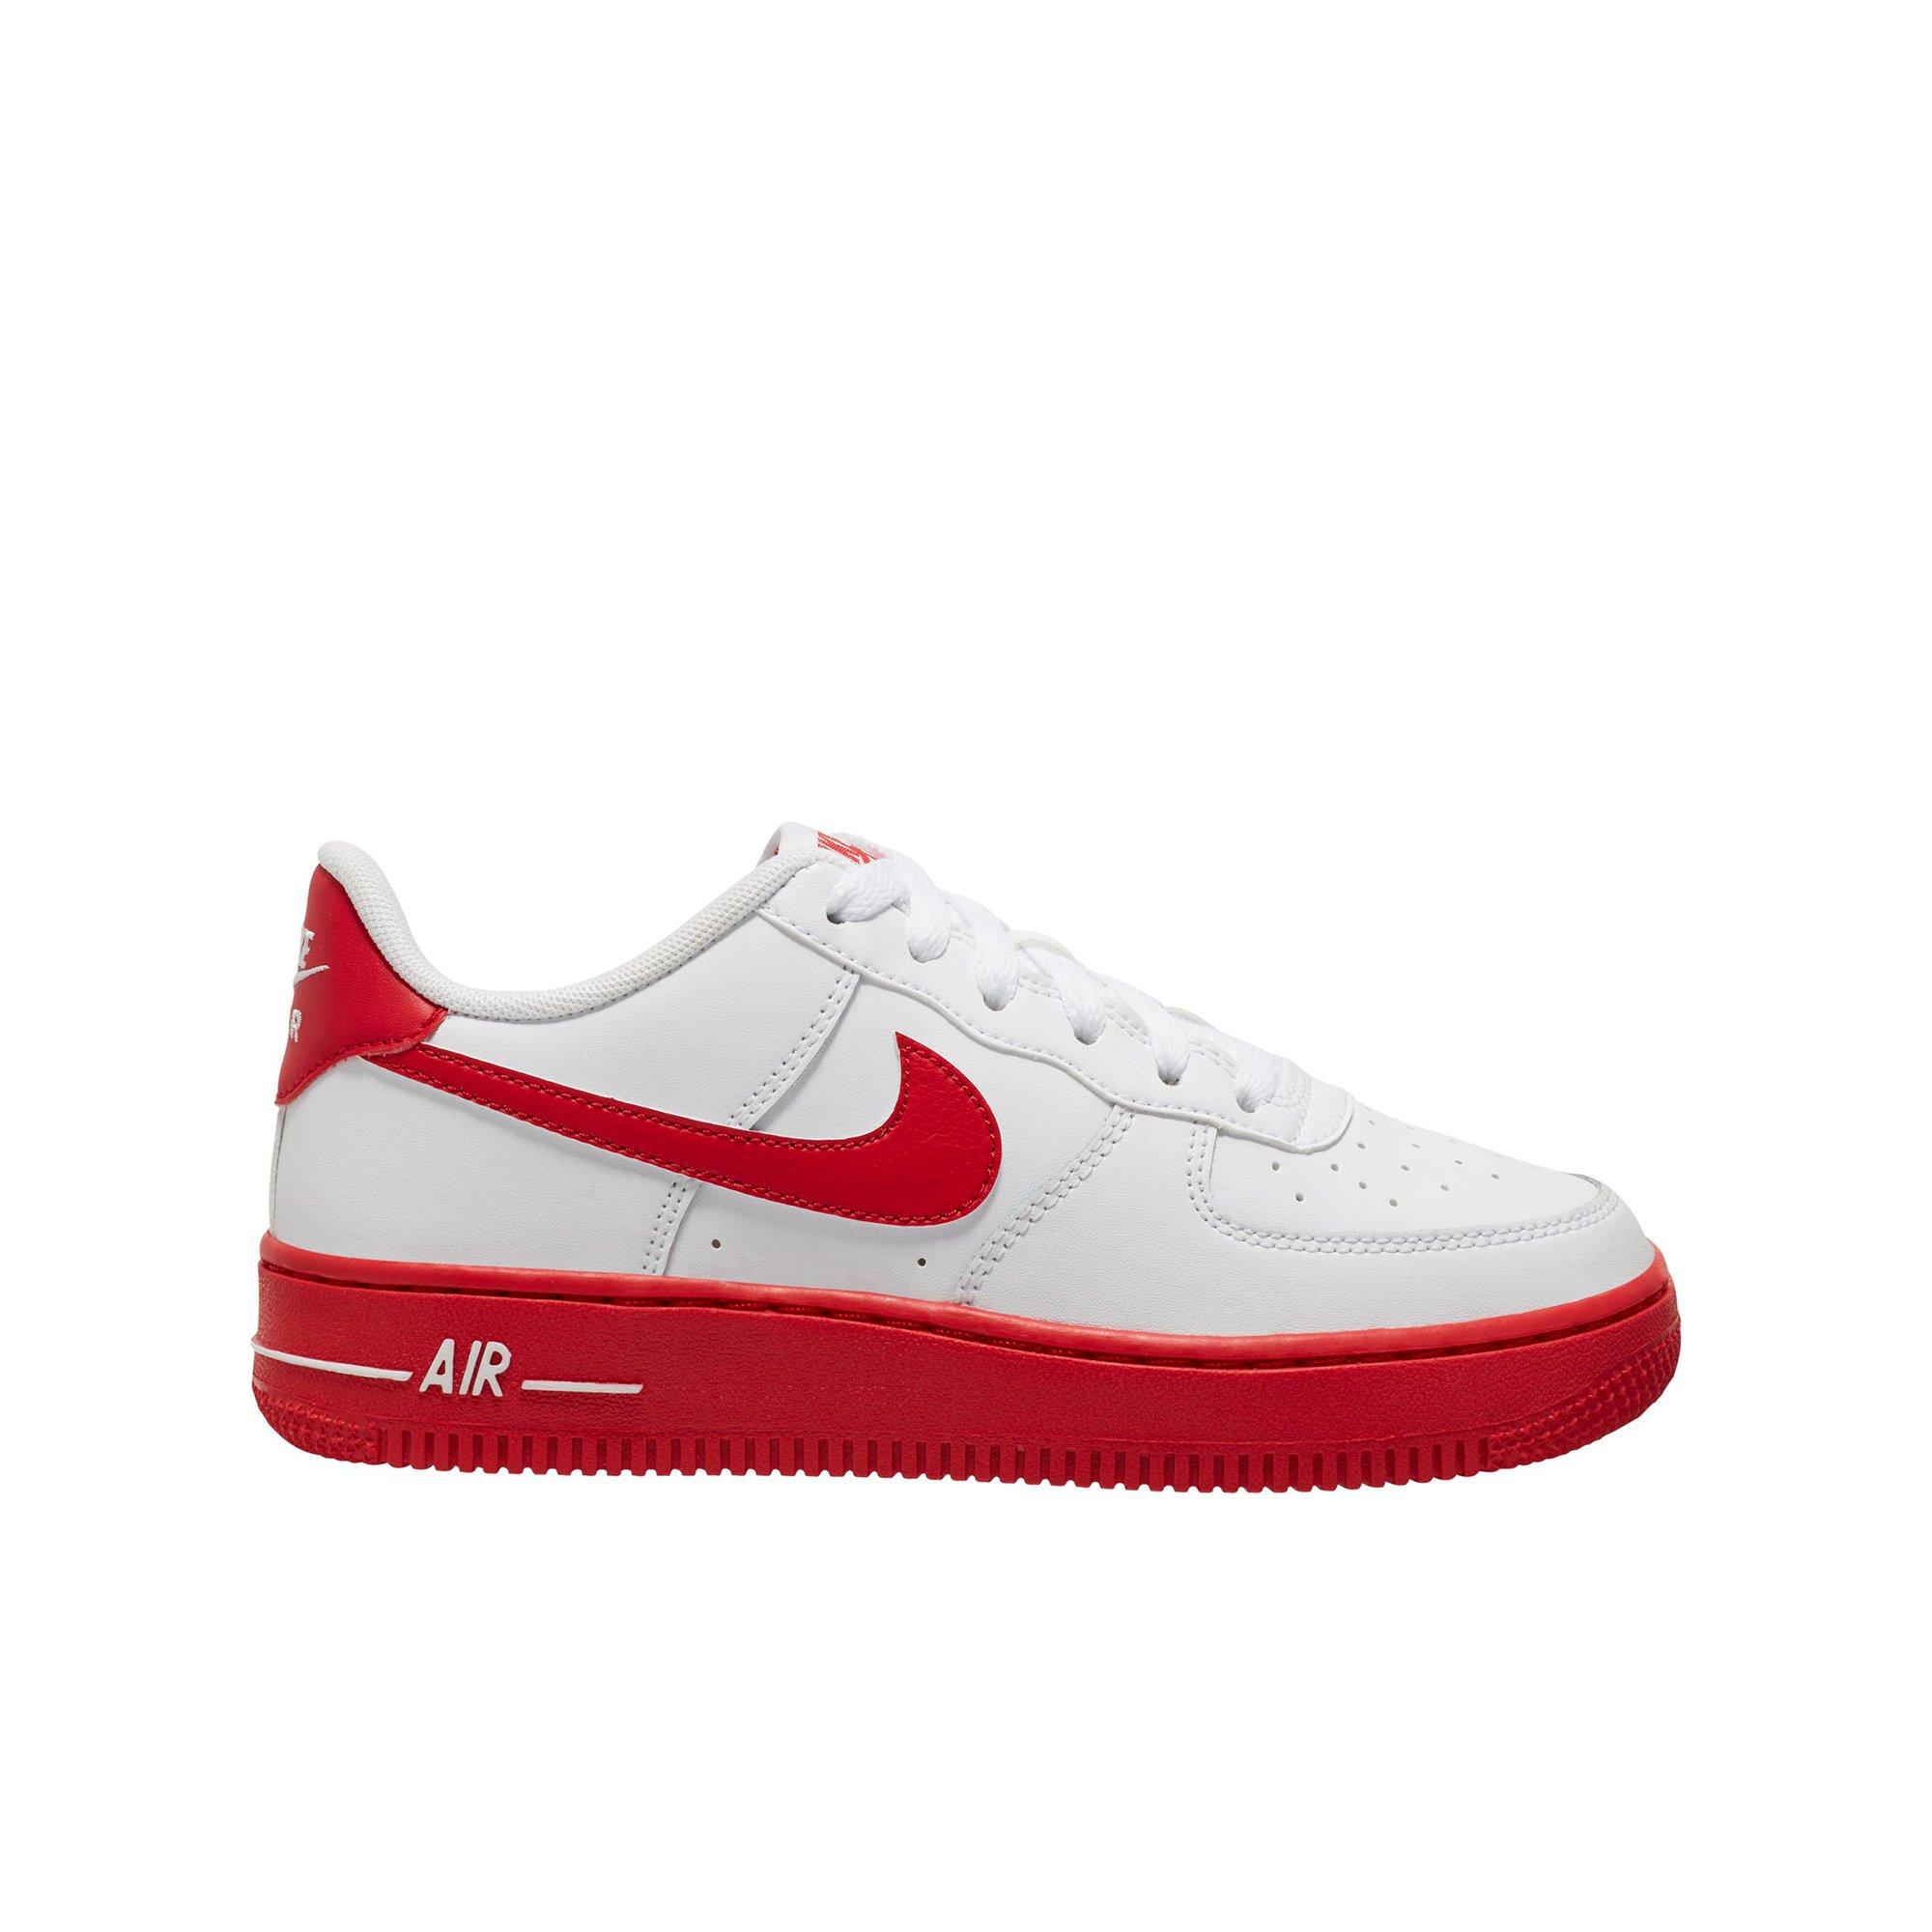 hibbett sports shoes air force ones